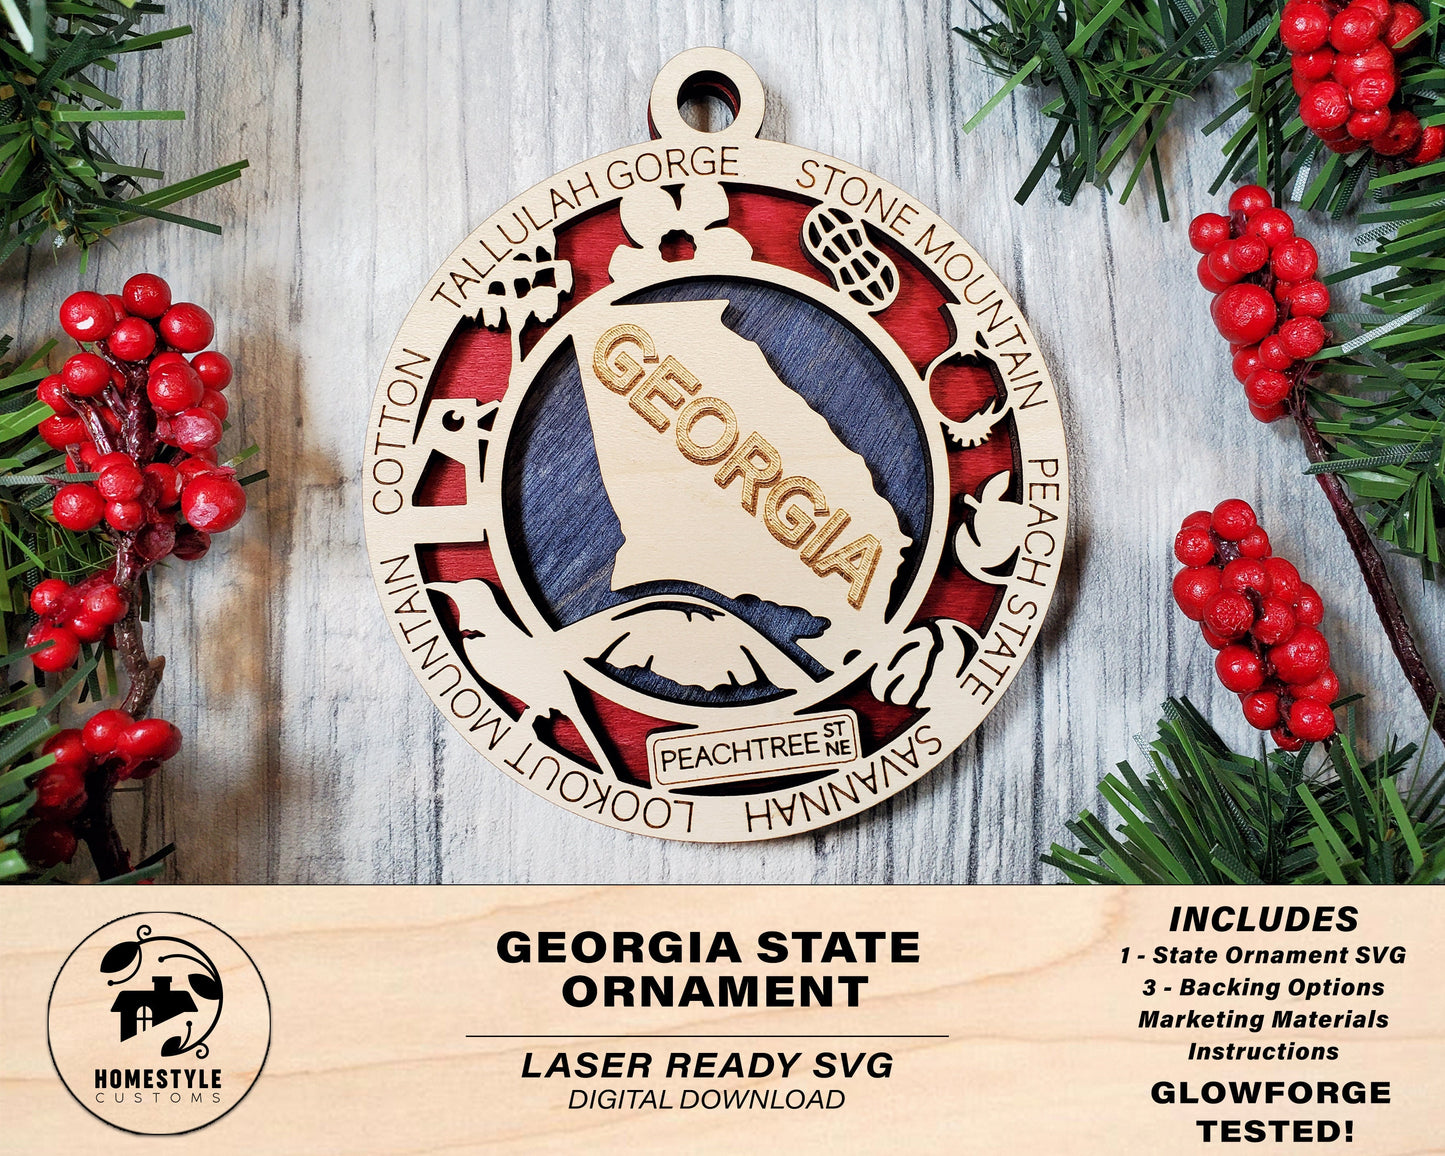 Georgia State Ornament - SVG File Download - Sized for Glowforge - Laser Ready Digital Files